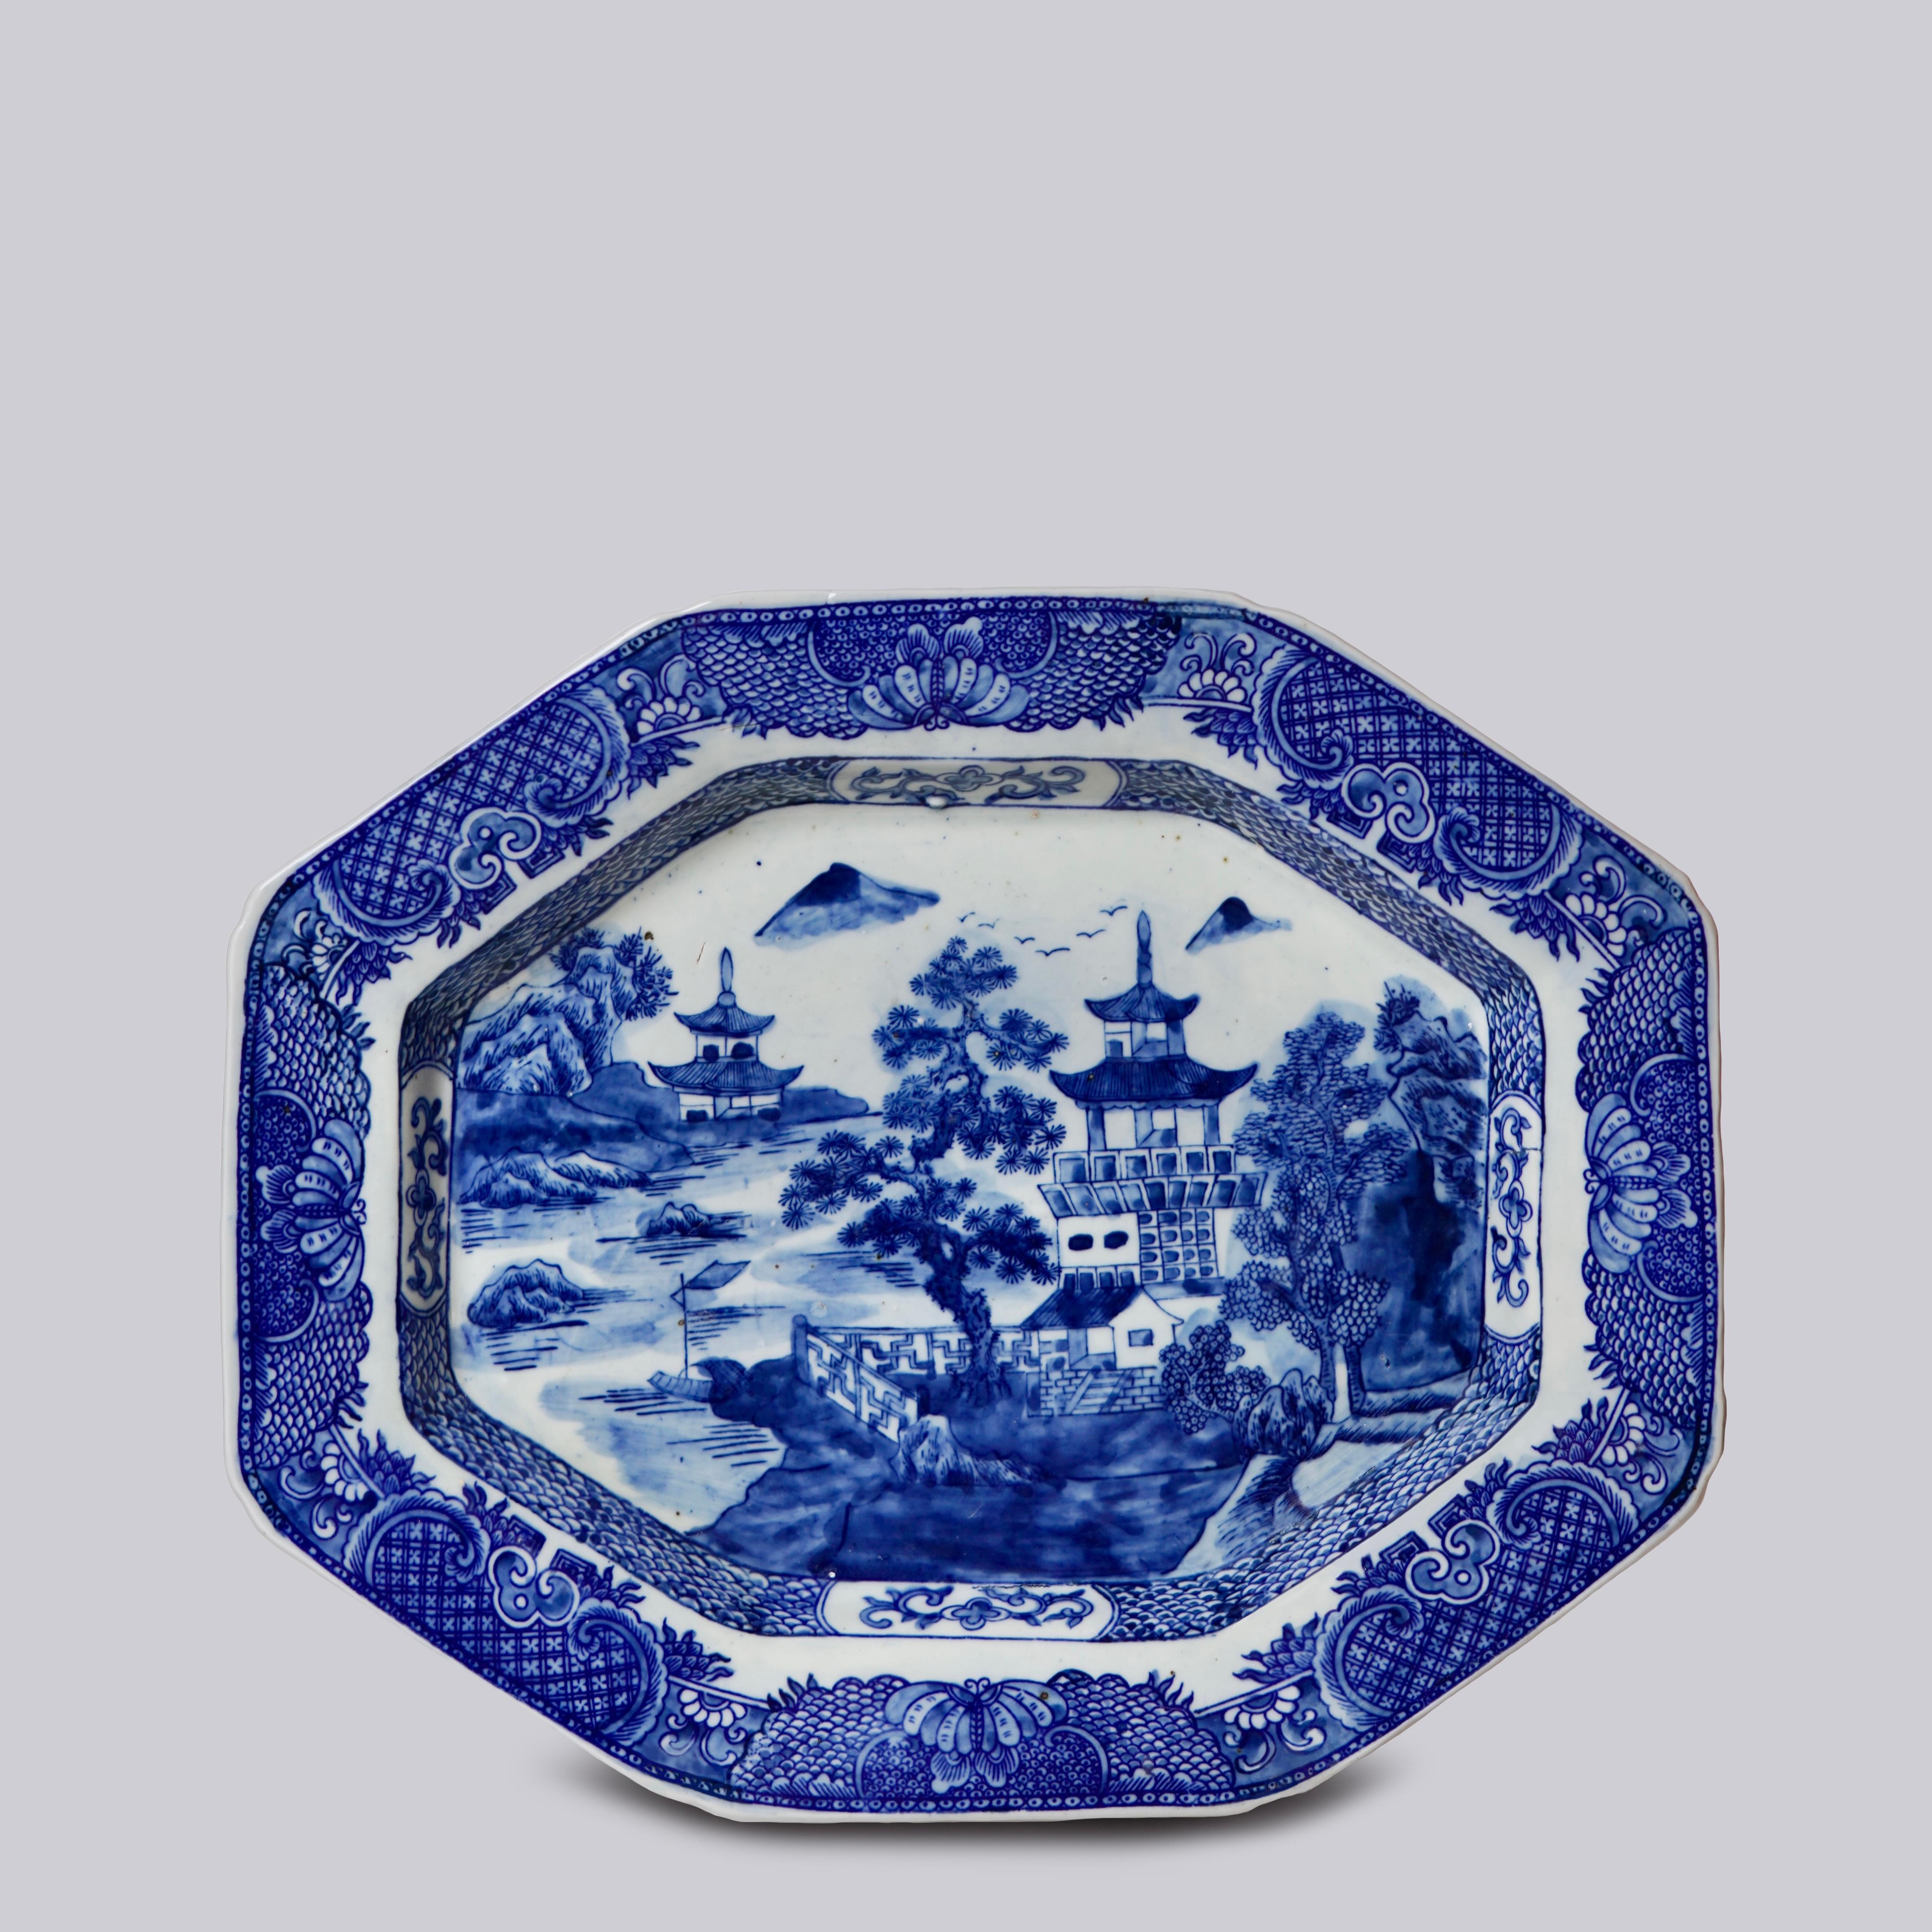 This platter is a traditional style from Jingdezhen, a town long distinguished by imperial patronage. The Willow Ware pattern is a beloved traditional Chinese style that was interpreted and reinterpreted by European potteries and is still popular